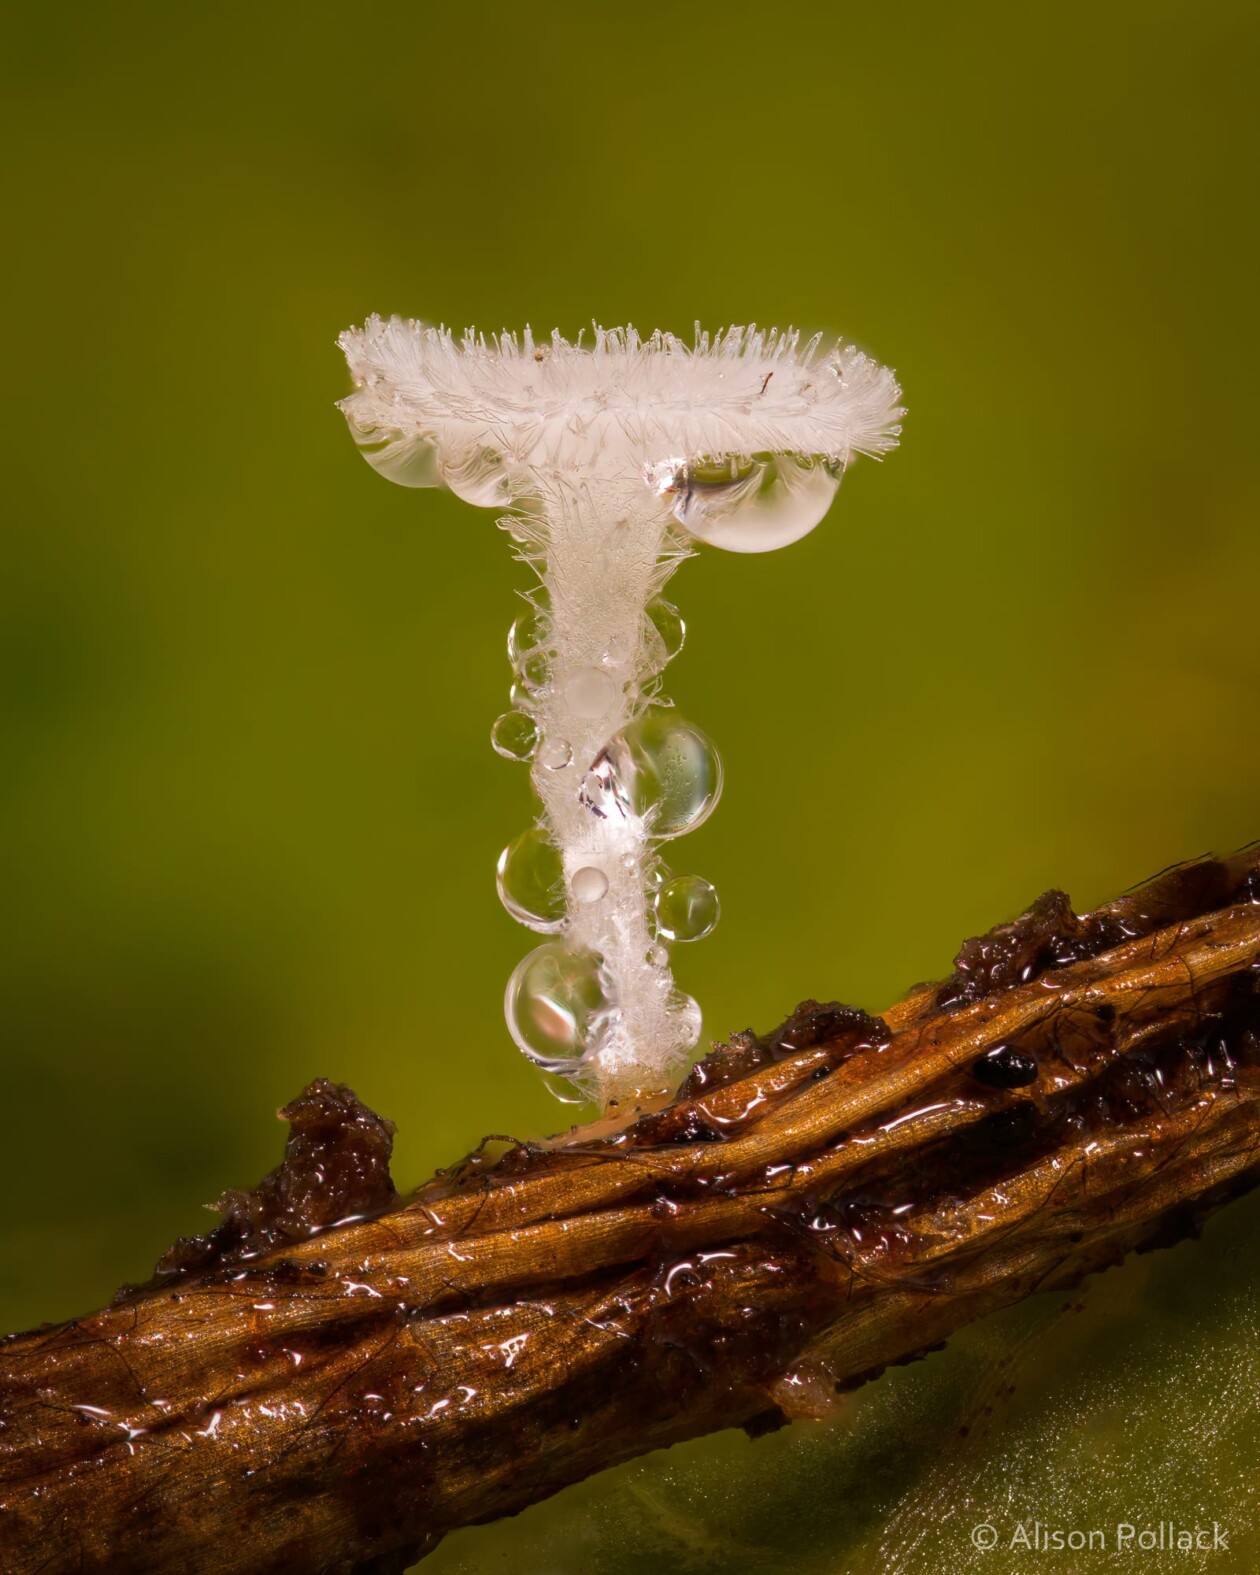 The Microscopic Majesty Of Mushrooms And Molds Captured By Alison Pollack (14)